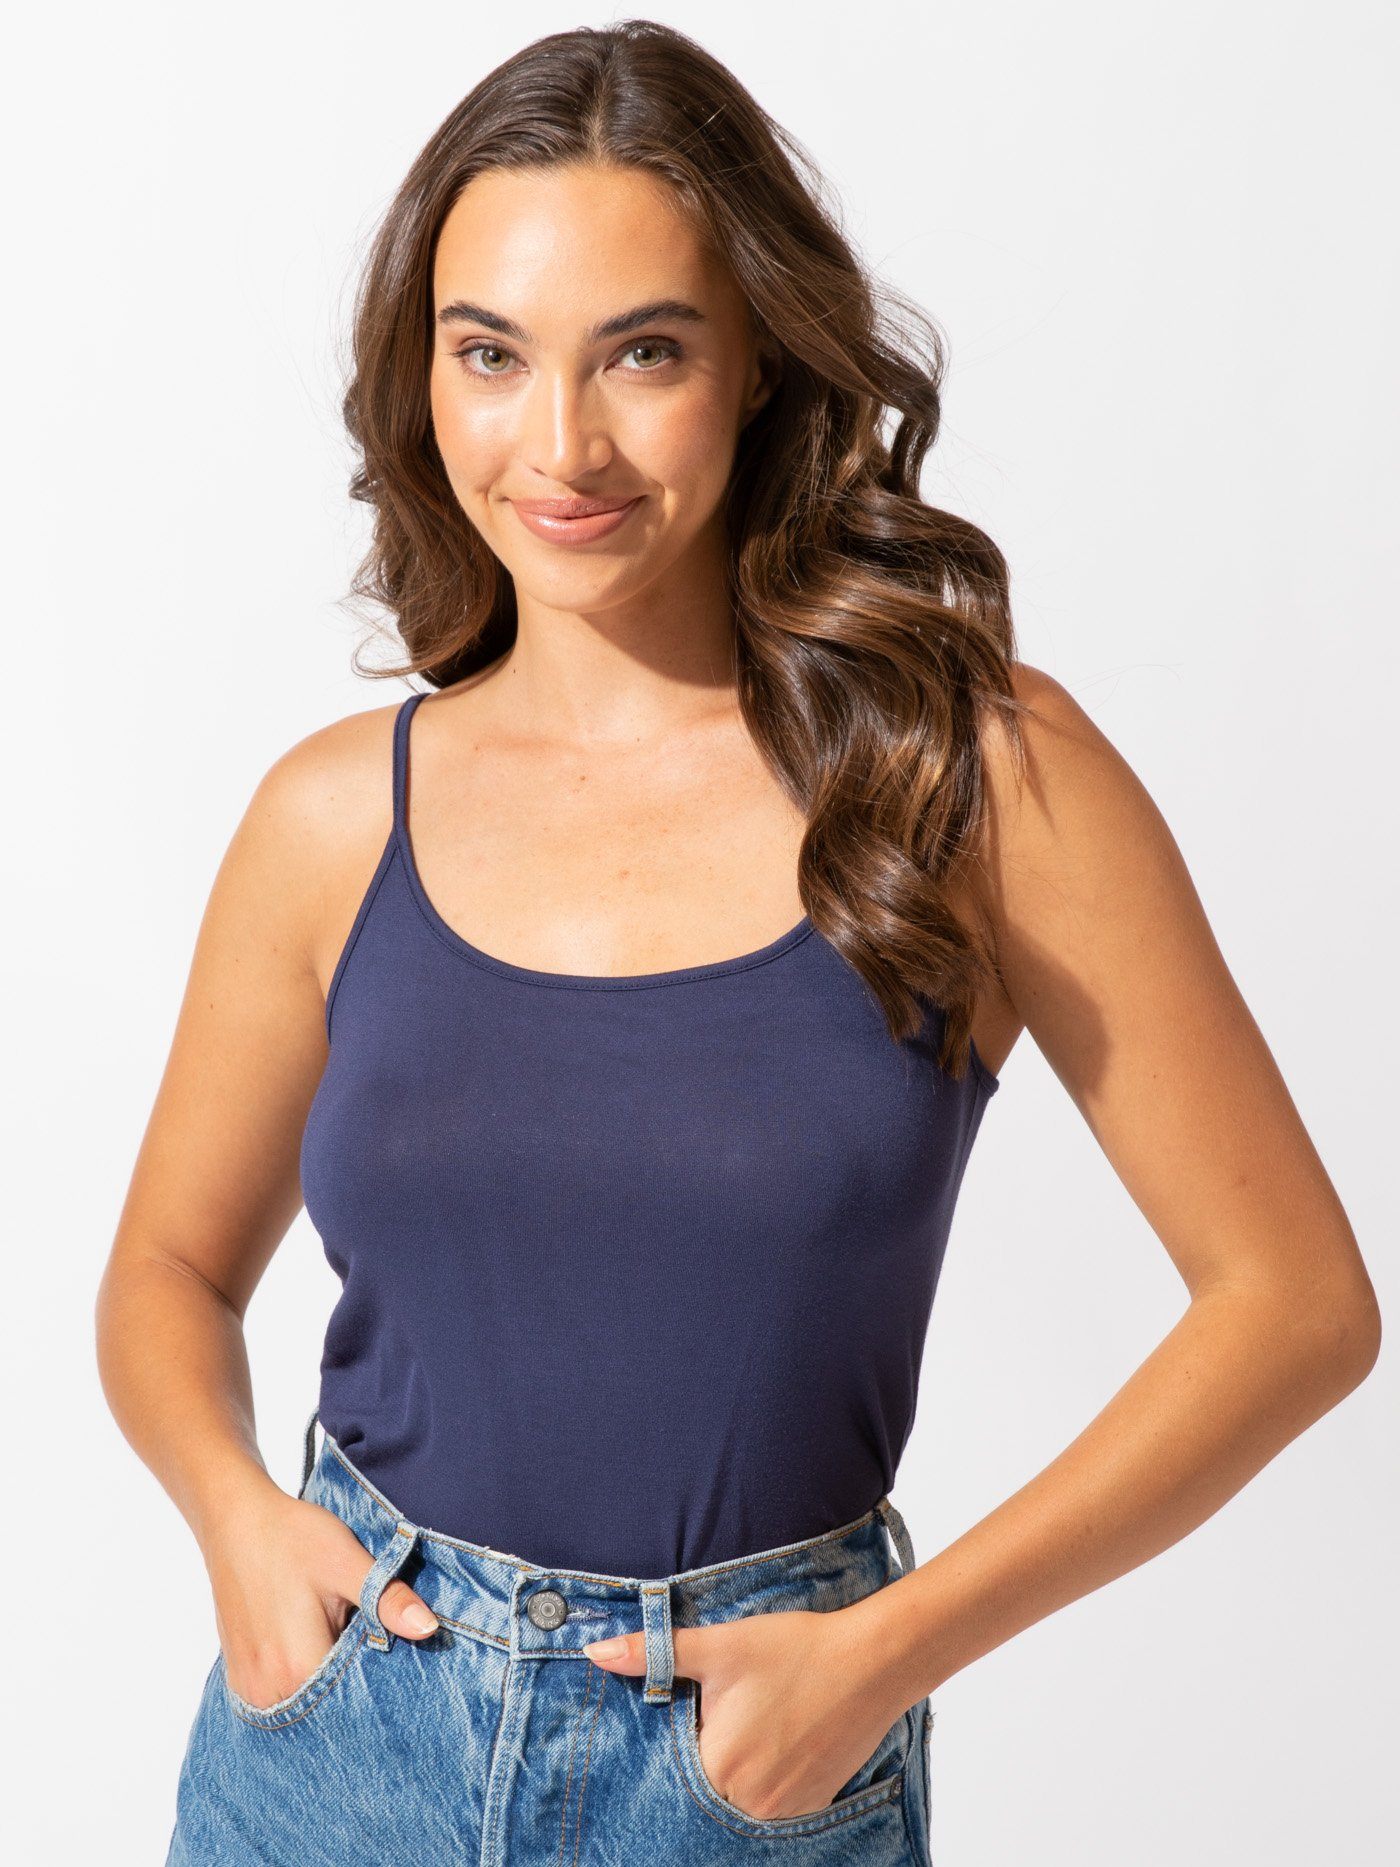 "Cami Tank" Womens Tops Cami Threads 4 Thought 